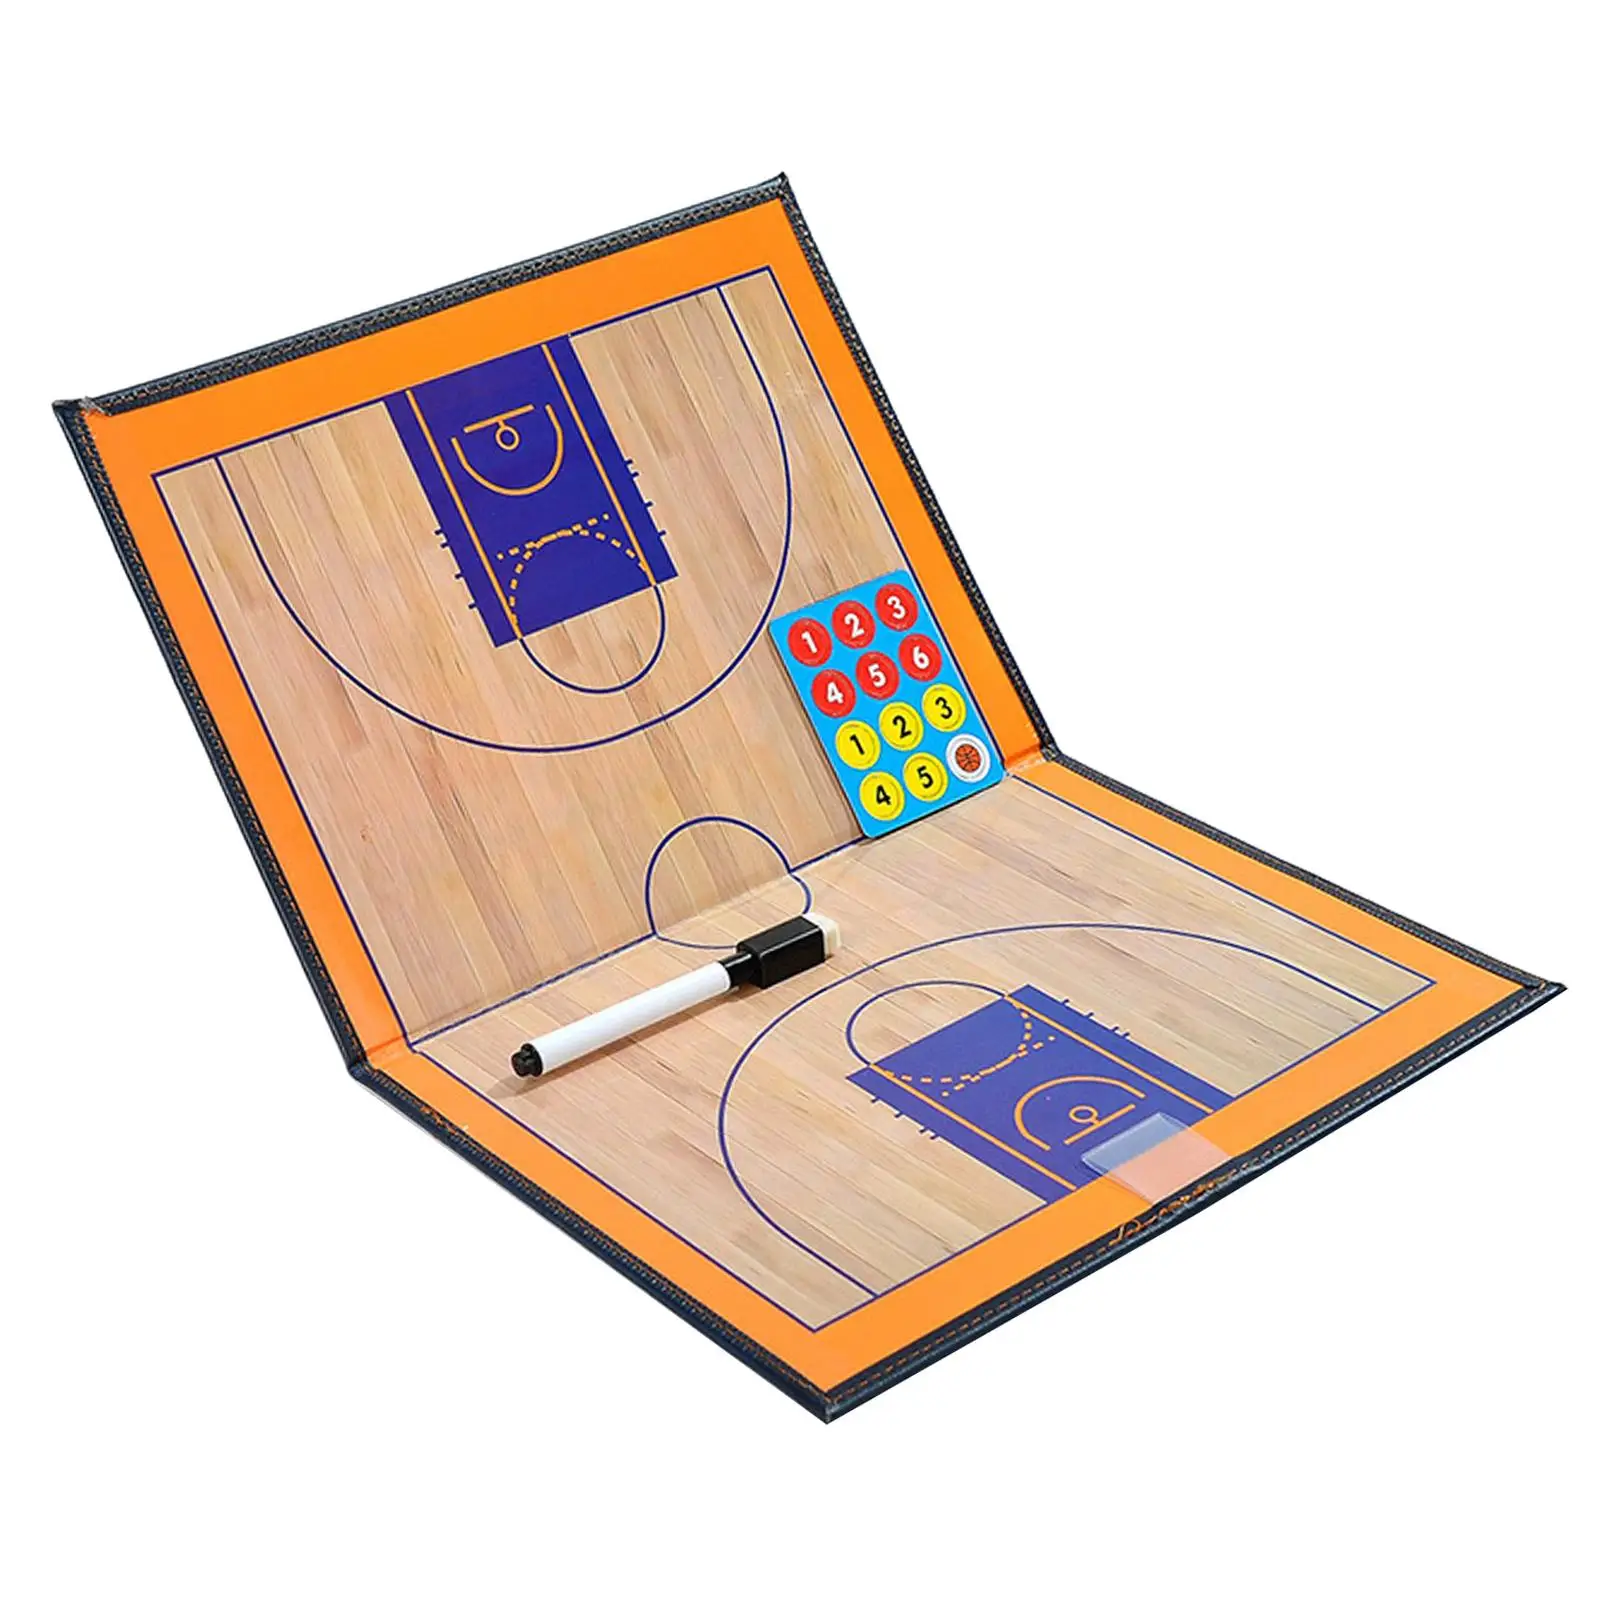 coachs Board Premium trickery Clipboard Two  with Full & Half Court  Marker Board for Basketball, Baseball, Soccer, Football